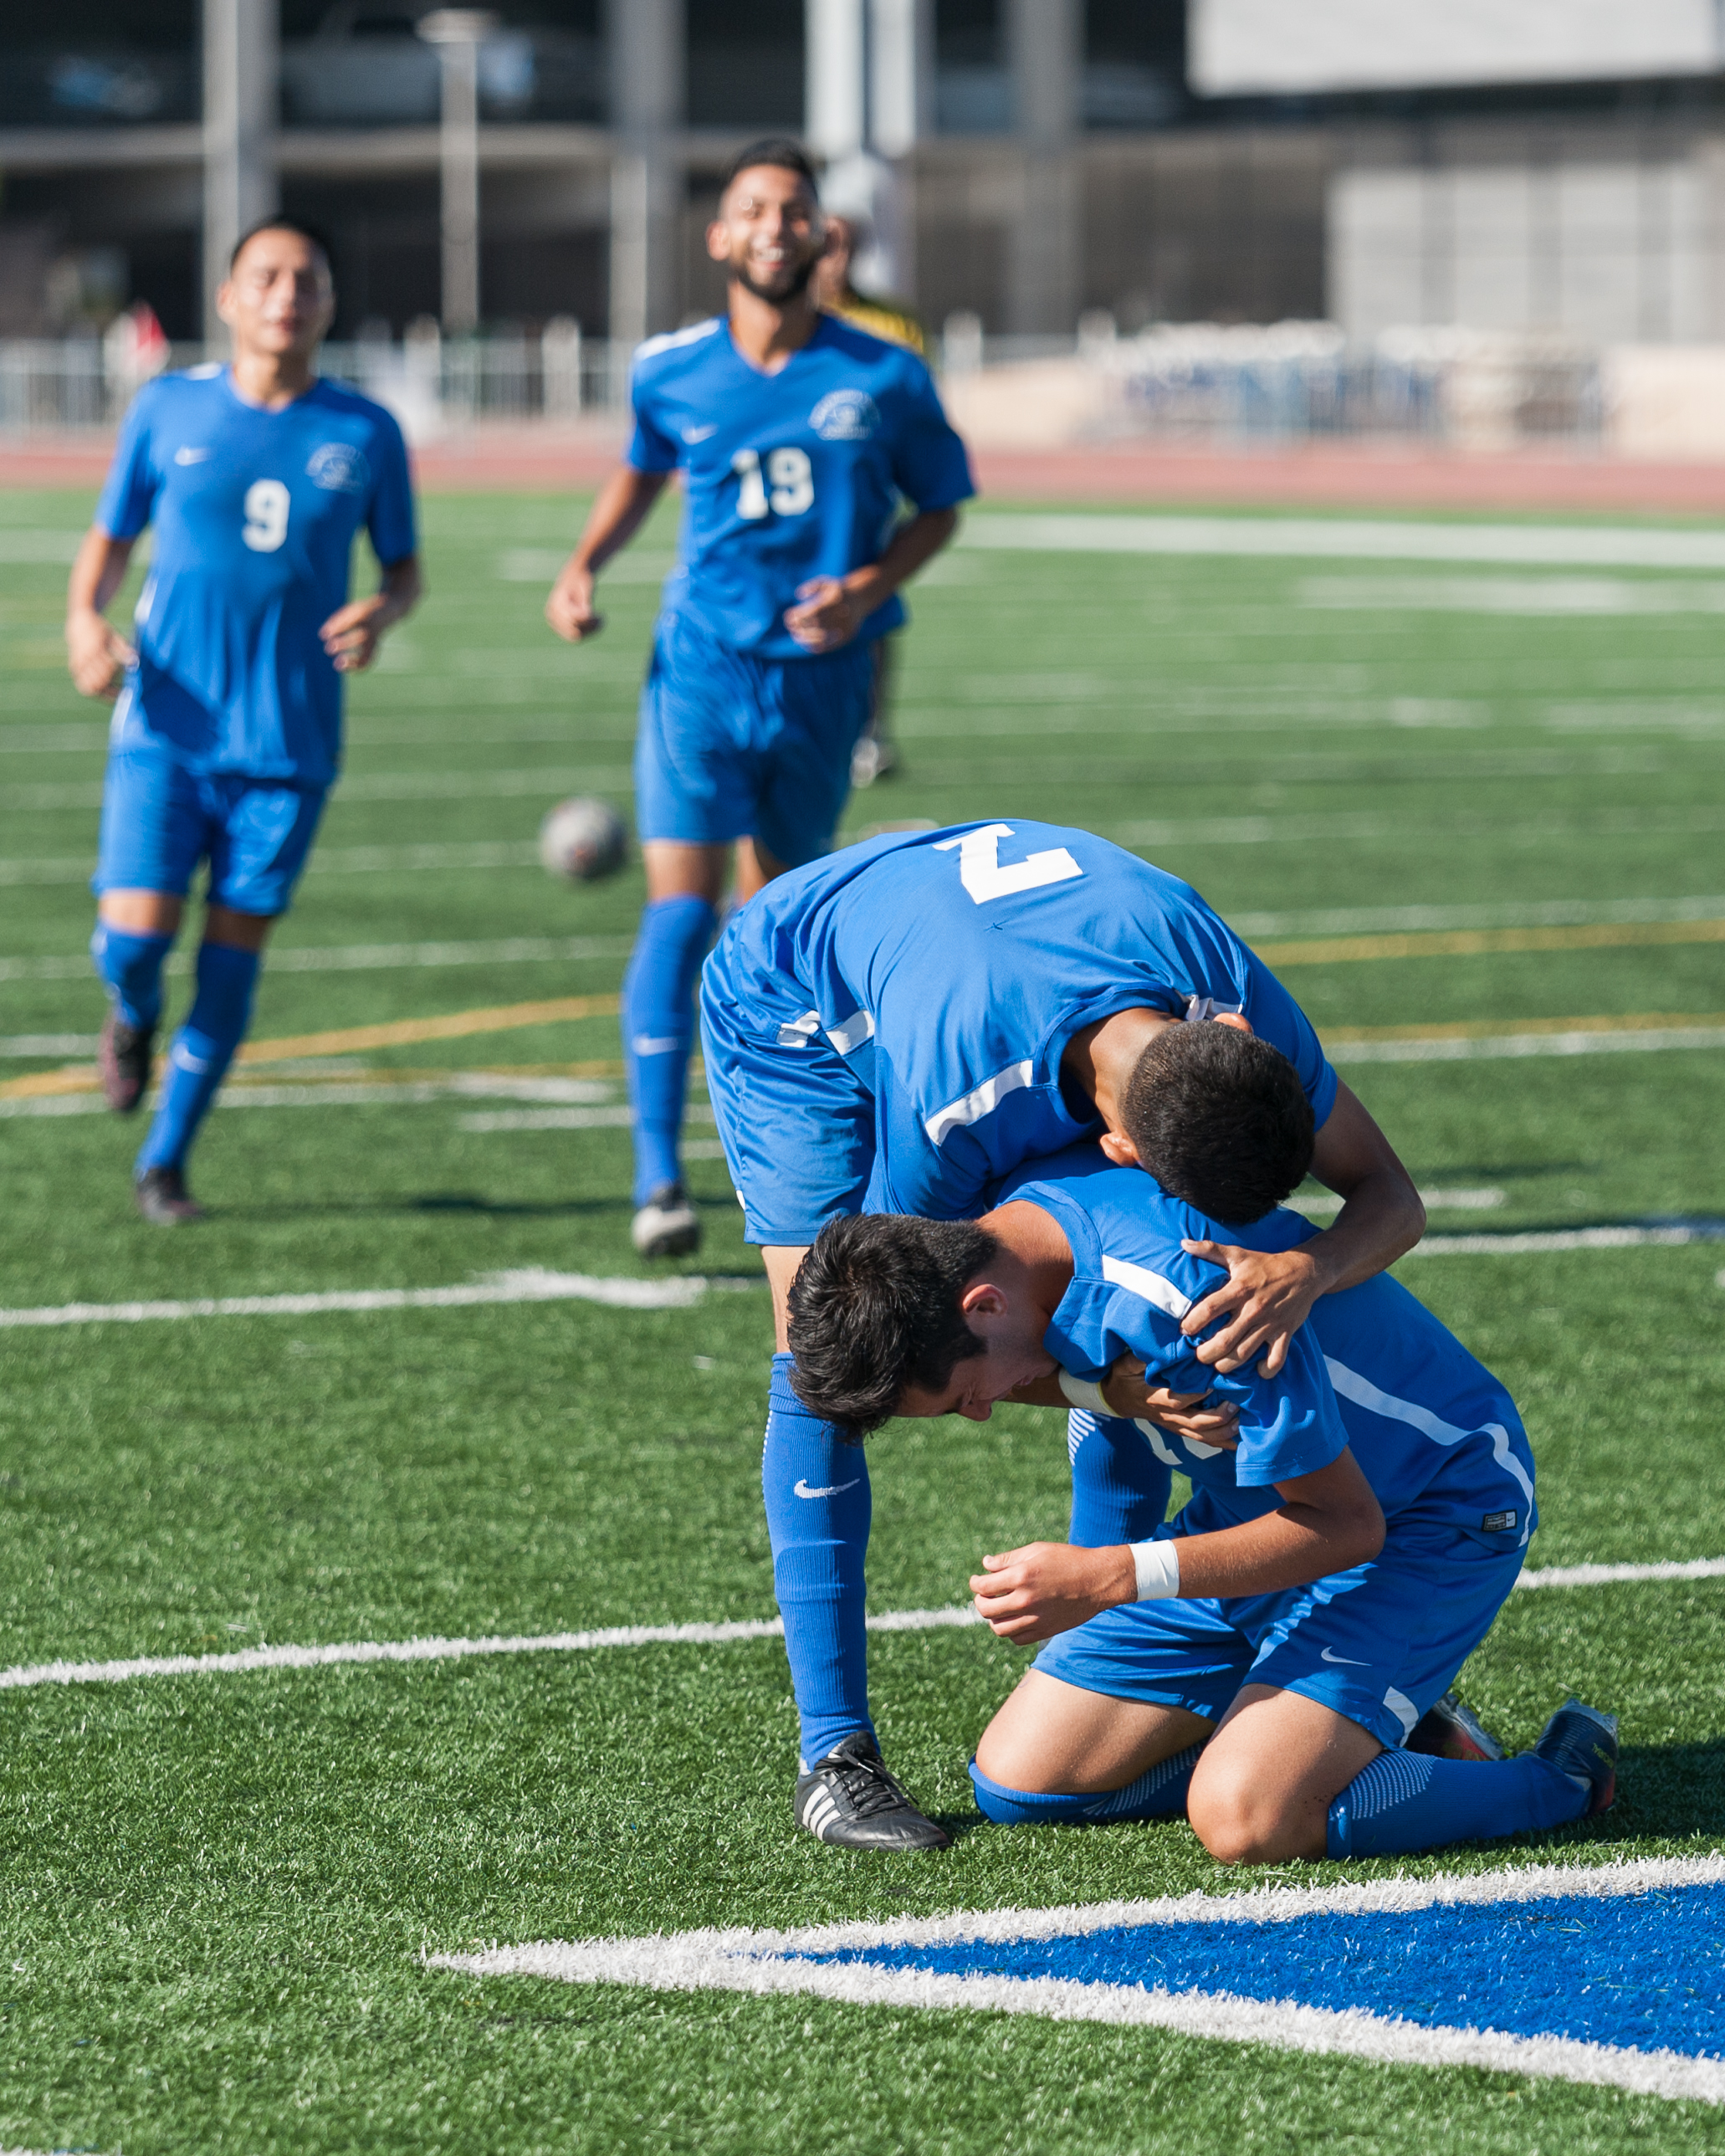  Midfielder Carlos Rincon (16) unleashes his emotions as he is embraced by teammate Kevin Martinez (7) who scored The Corsair's first goal in the a minute prior. Rincon scored the second goal, putting the Corsairs up 2-0 against Victor Valley at the 